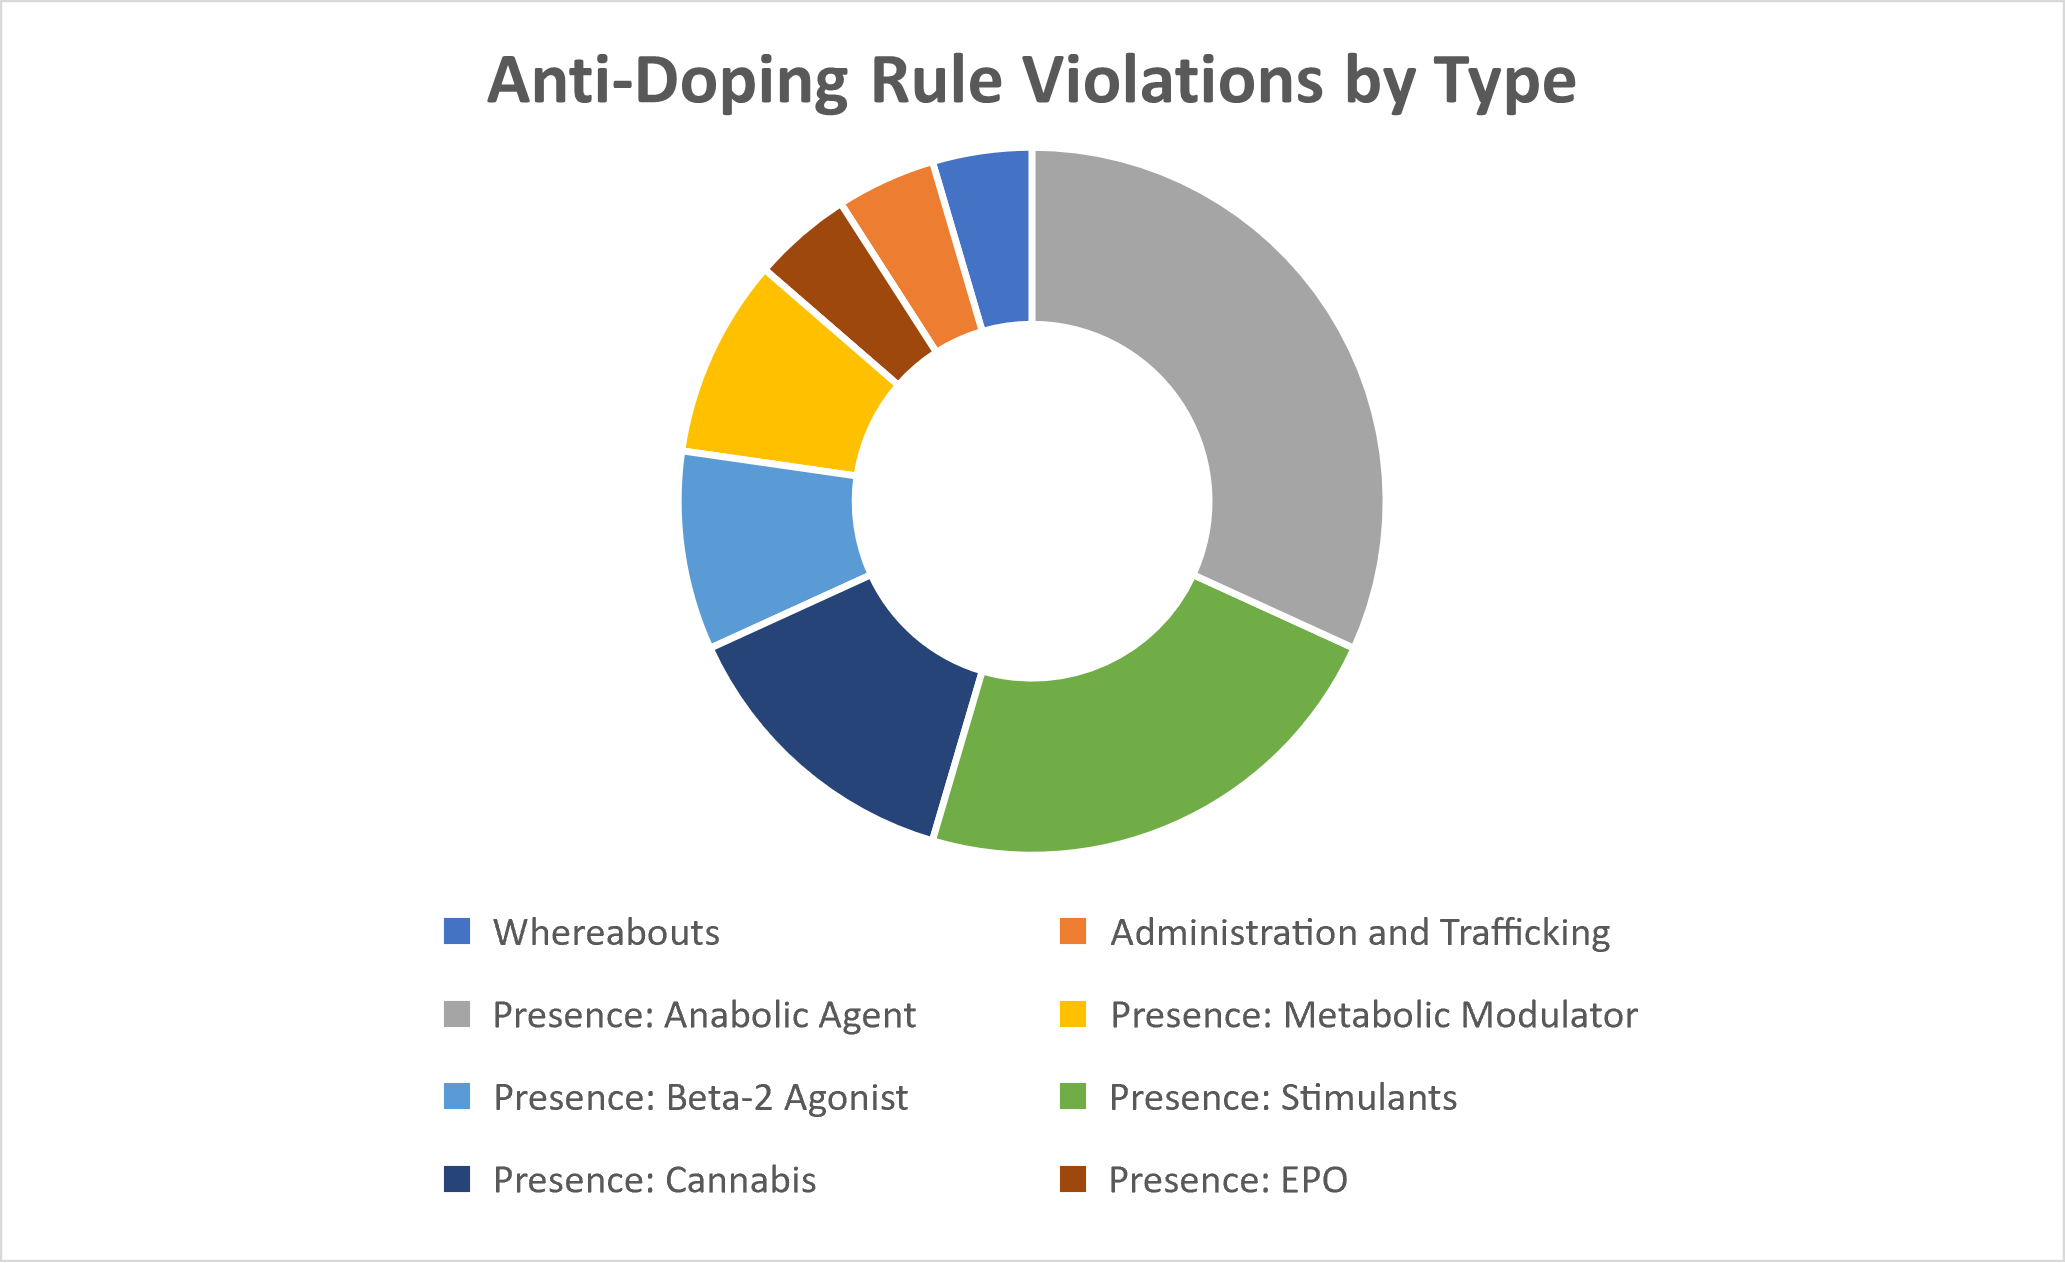 Graph showing violations by type